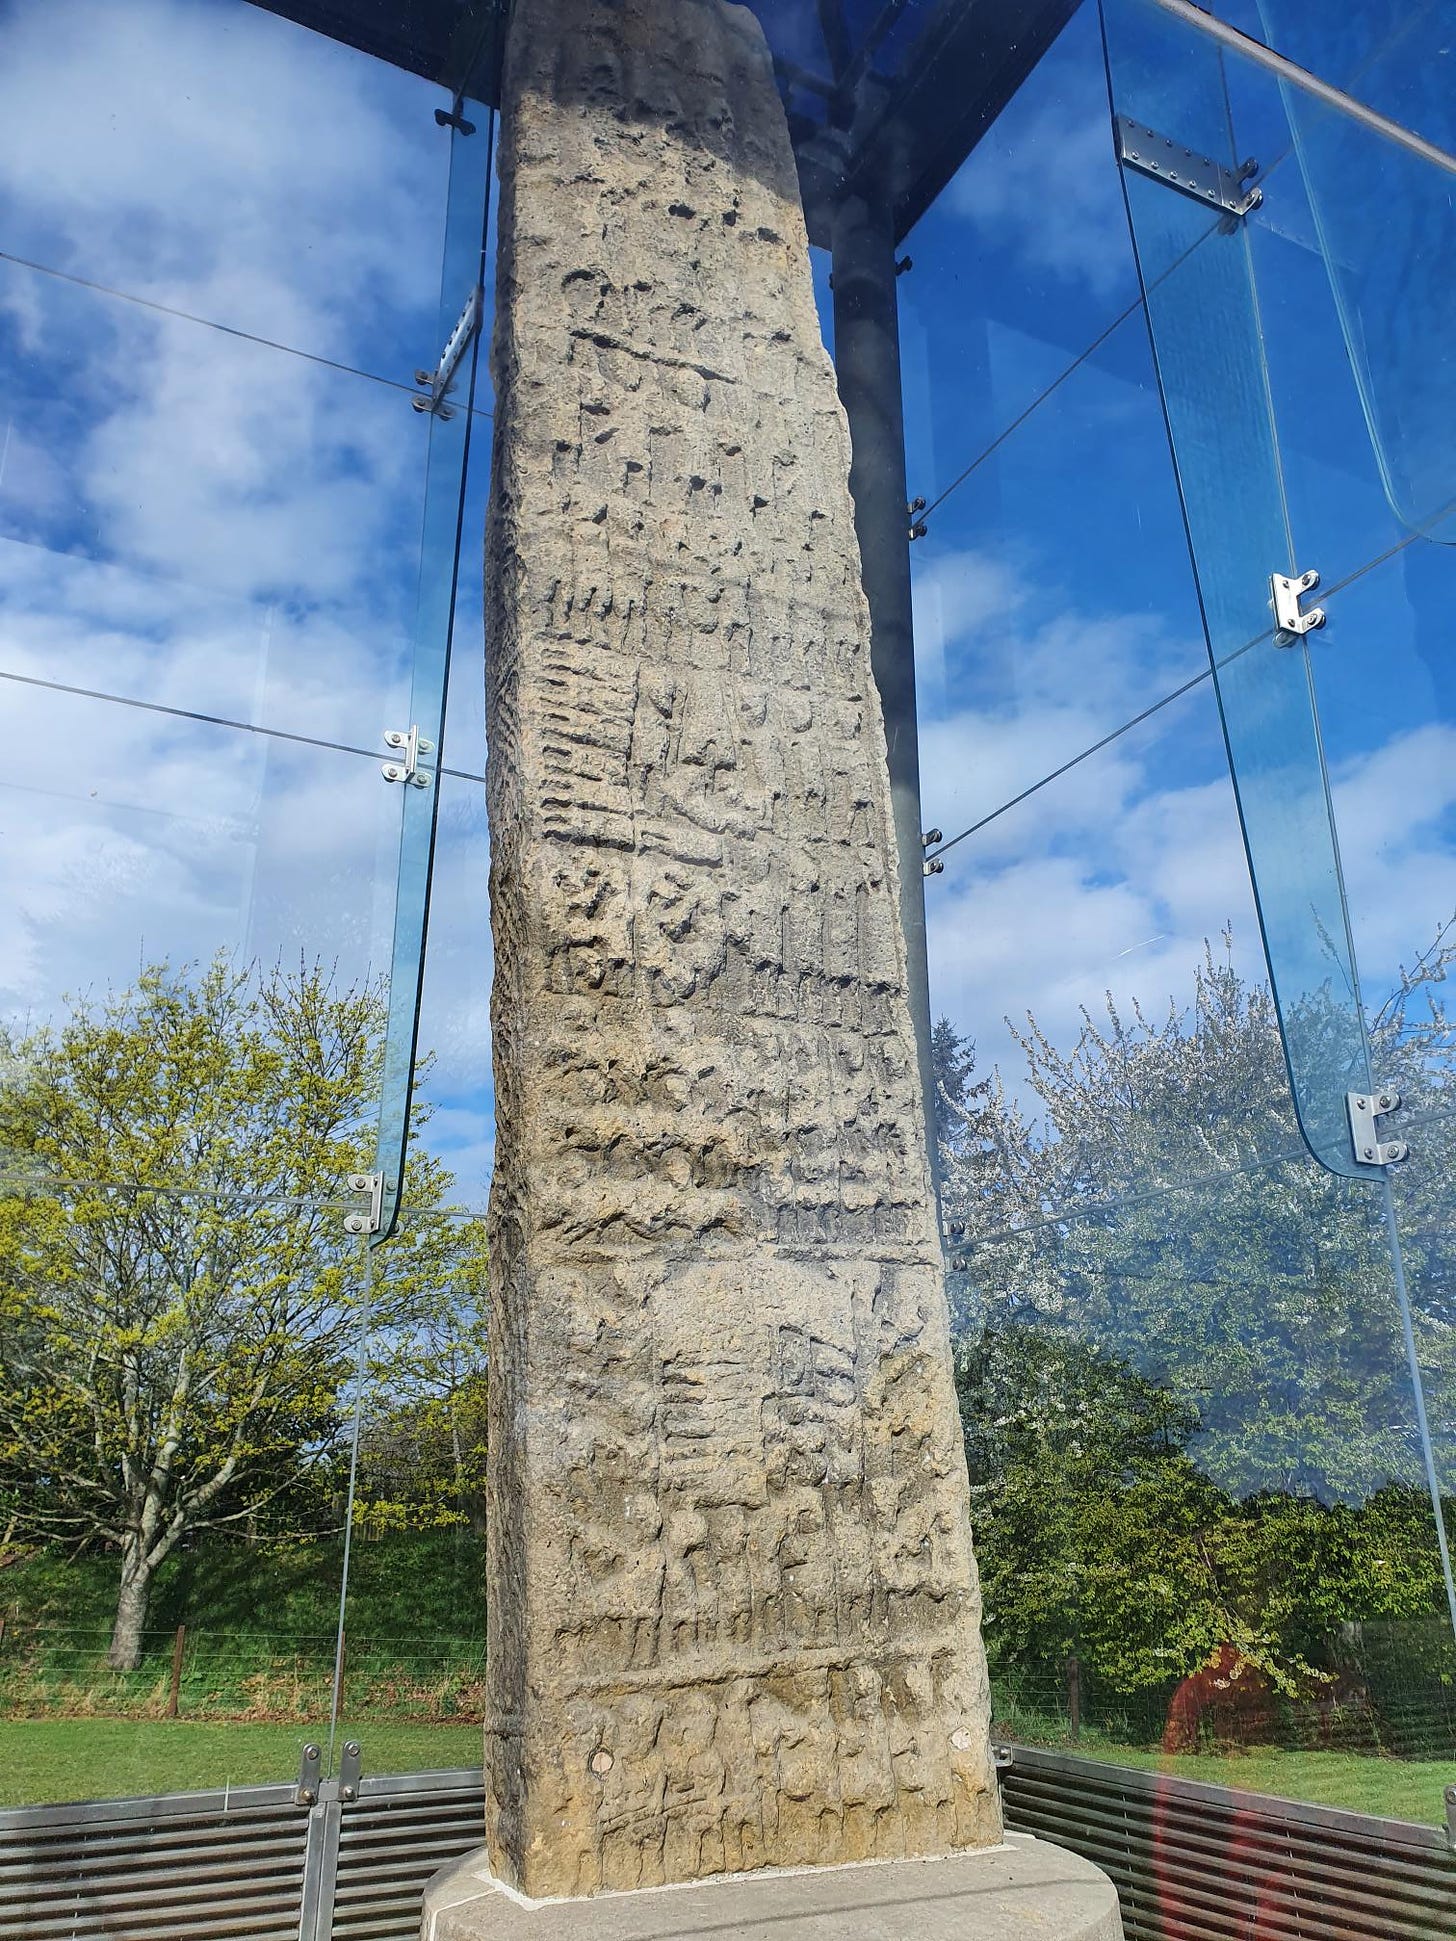 Photo of the east face of Sueno's Stone near Forres, Moray, Scotland - showing its carved battle scenes, now very weathered.